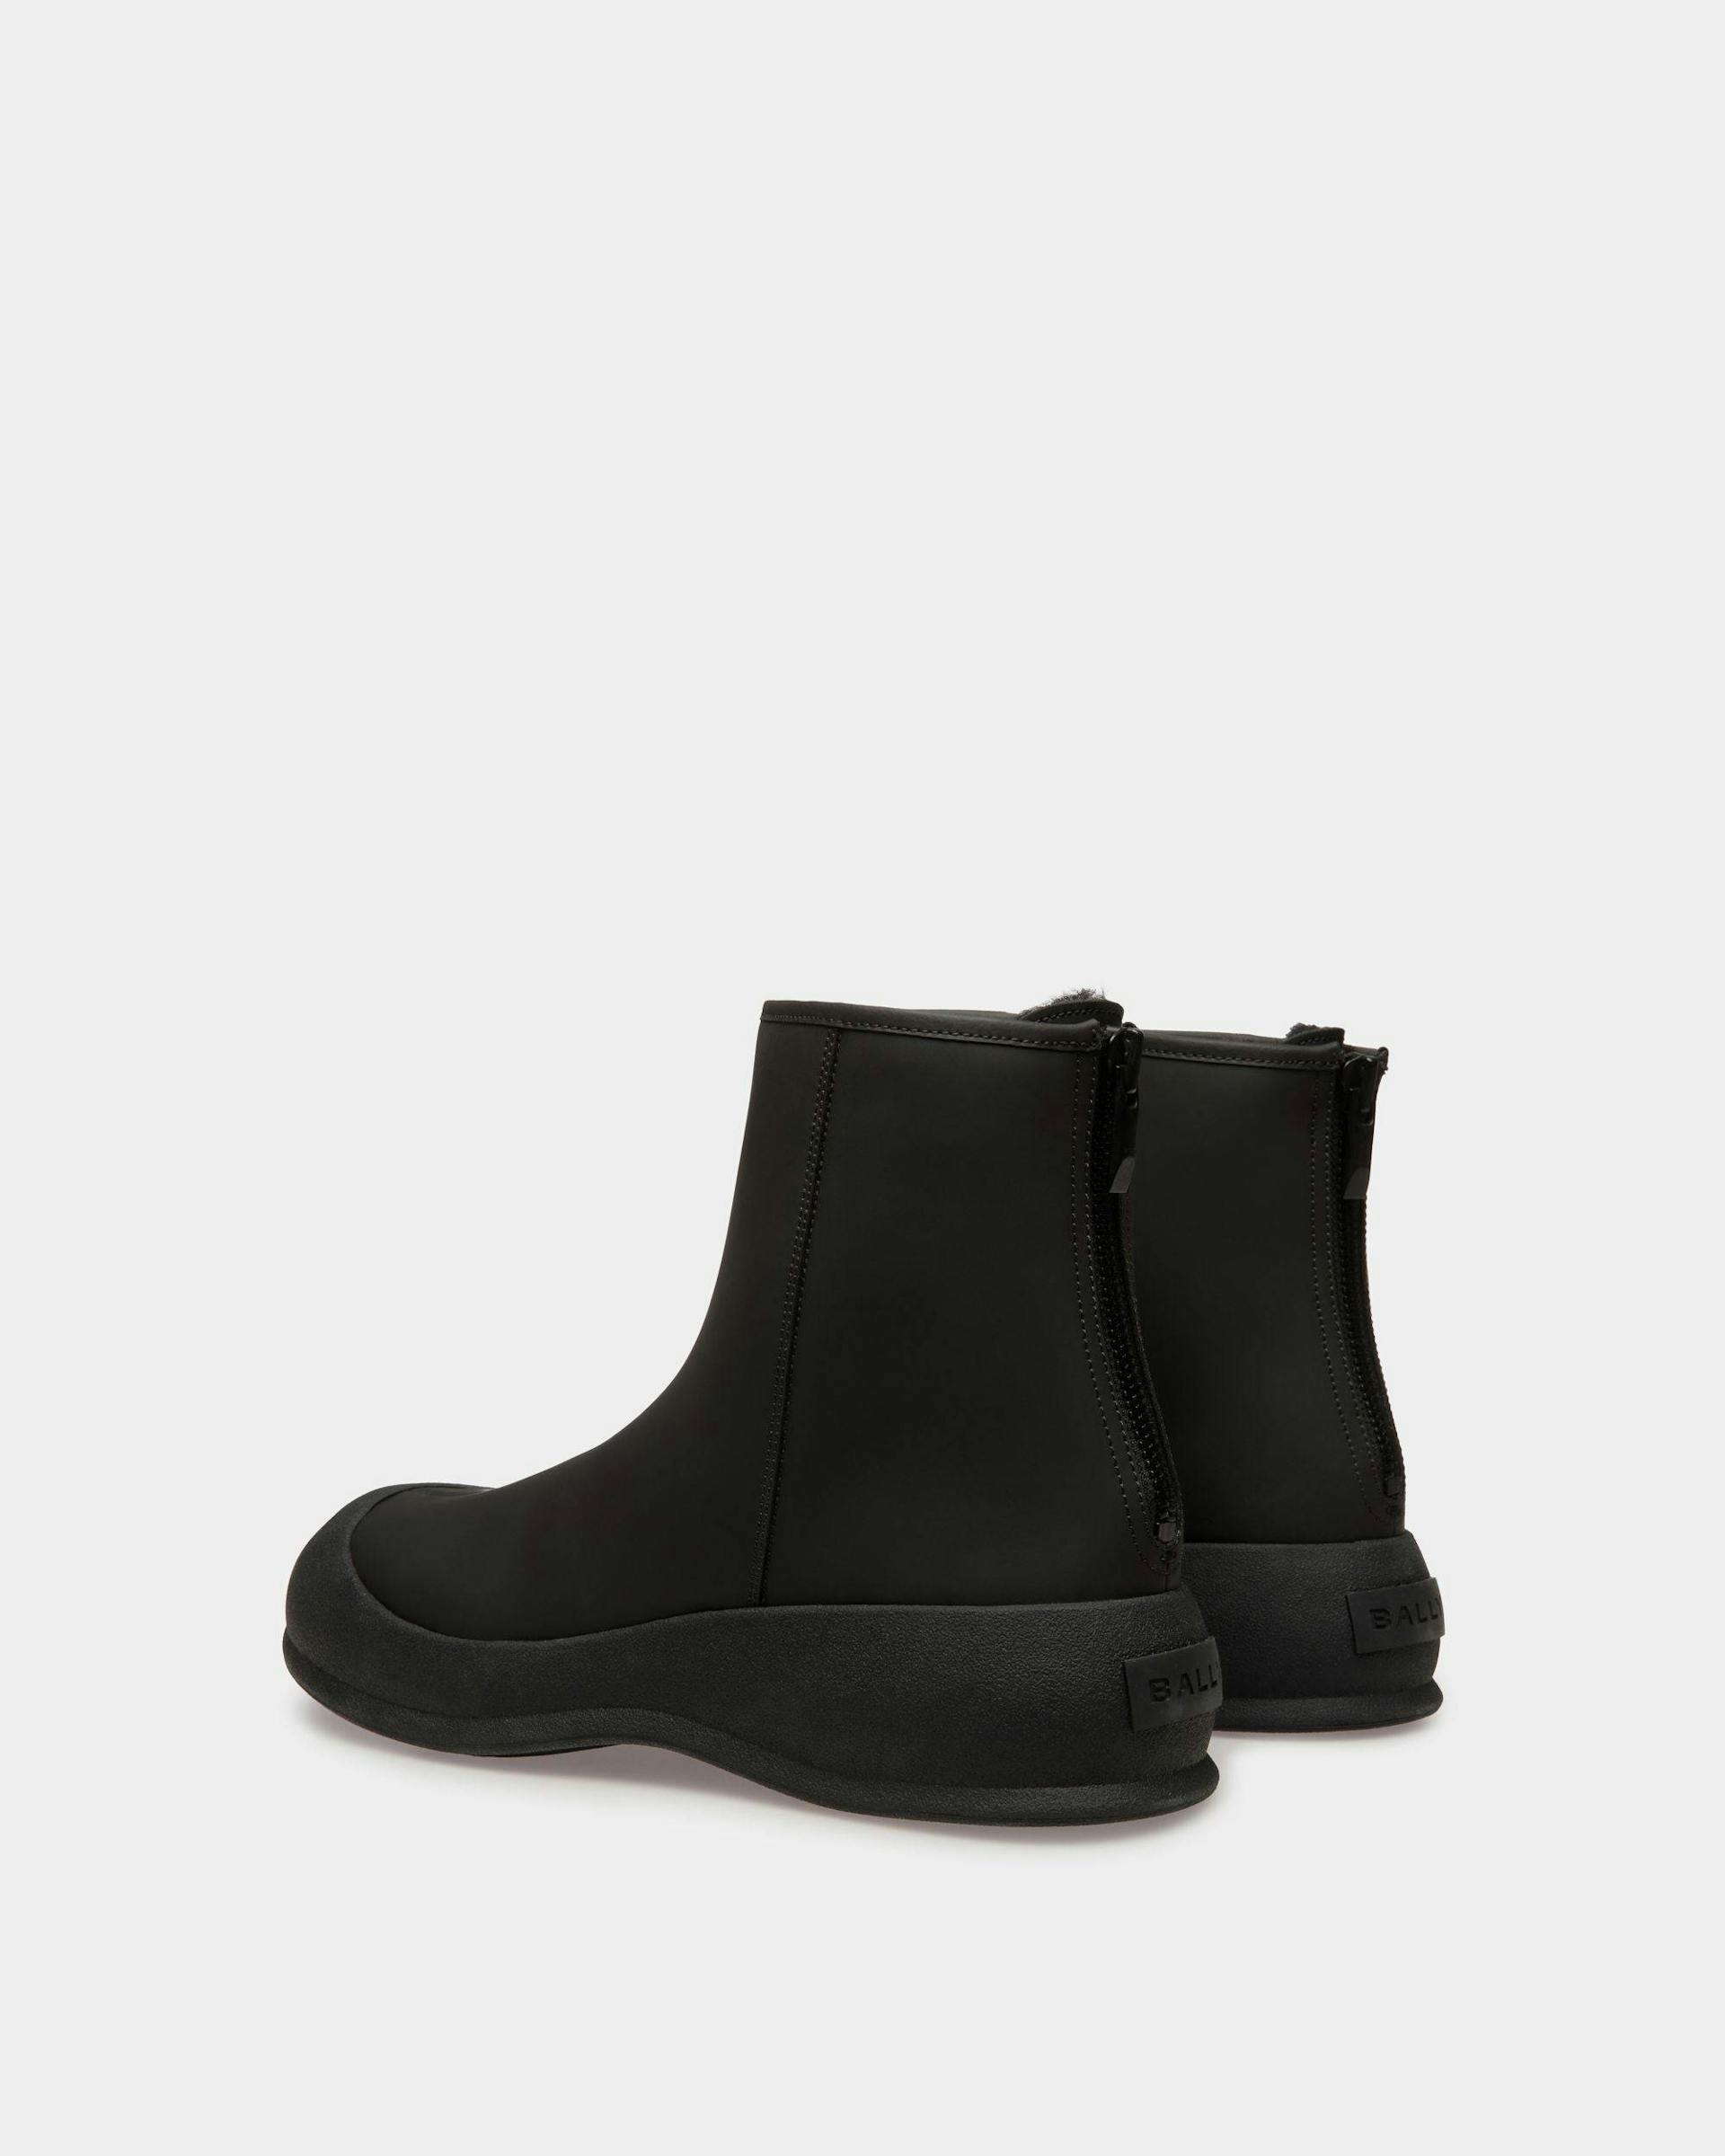 Men's Frei Snow Boots In Black Leather | Bally | Still Life 3/4 Back